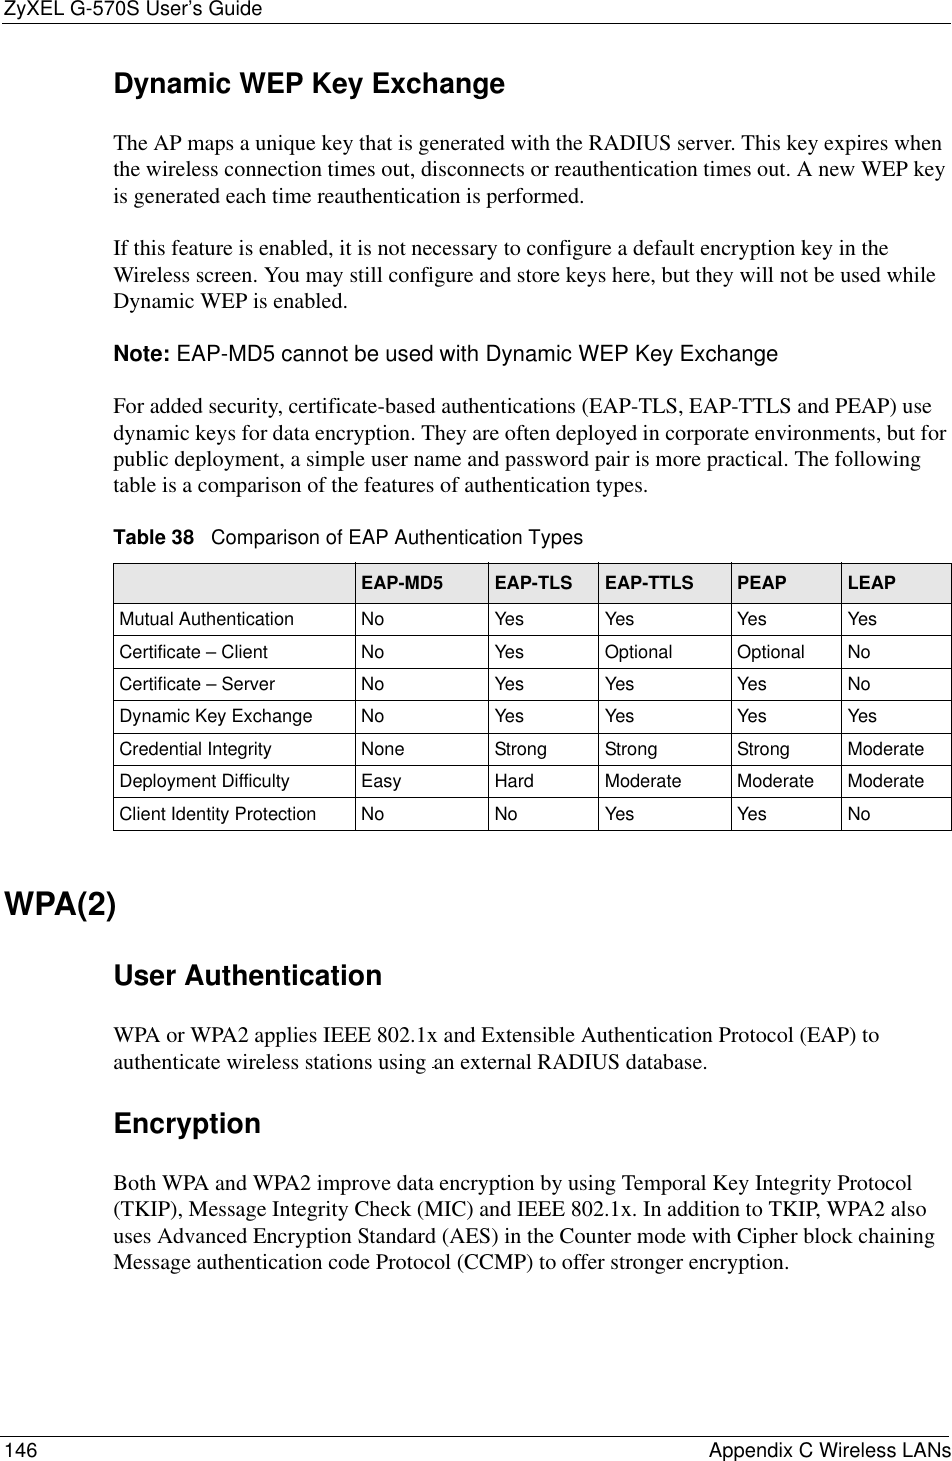 ZyXEL G-570S User’s Guide146 Appendix C Wireless LANsDynamic WEP Key ExchangeThe AP maps a unique key that is generated with the RADIUS server. This key expires when the wireless connection times out, disconnects or reauthentication times out. A new WEP key is generated each time reauthentication is performed.If this feature is enabled, it is not necessary to configure a default encryption key in the Wireless screen. You may still configure and store keys here, but they will not be used while Dynamic WEP is enabled.Note: EAP-MD5 cannot be used with Dynamic WEP Key ExchangeFor added security, certificate-based authentications (EAP-TLS, EAP-TTLS and PEAP) use dynamic keys for data encryption. They are often deployed in corporate environments, but for public deployment, a simple user name and password pair is more practical. The following table is a comparison of the features of authentication types.WPA(2)User Authentication WPA or WPA2 applies IEEE 802.1x and Extensible Authentication Protocol (EAP) to authenticate wireless stations using an external RADIUS database. EncryptionBoth WPA and WPA2 improve data encryption by using Temporal Key Integrity Protocol (TKIP), Message Integrity Check (MIC) and IEEE 802.1x. In addition to TKIP, WPA2 also uses Advanced Encryption Standard (AES) in the Counter mode with Cipher block chaining Message authentication code Protocol (CCMP) to offer stronger encryption.Table 38   Comparison of EAP Authentication TypesEAP-MD5 EAP-TLS EAP-TTLS PEAP LEAPMutual Authentication No Yes Yes Yes YesCertificate – Client No Yes Optional Optional NoCertificate – Server No Yes Yes Yes NoDynamic Key Exchange No Yes Yes Yes YesCredential Integrity None Strong Strong Strong ModerateDeployment Difficulty Easy Hard Moderate Moderate ModerateClient Identity Protection No No Yes Yes No